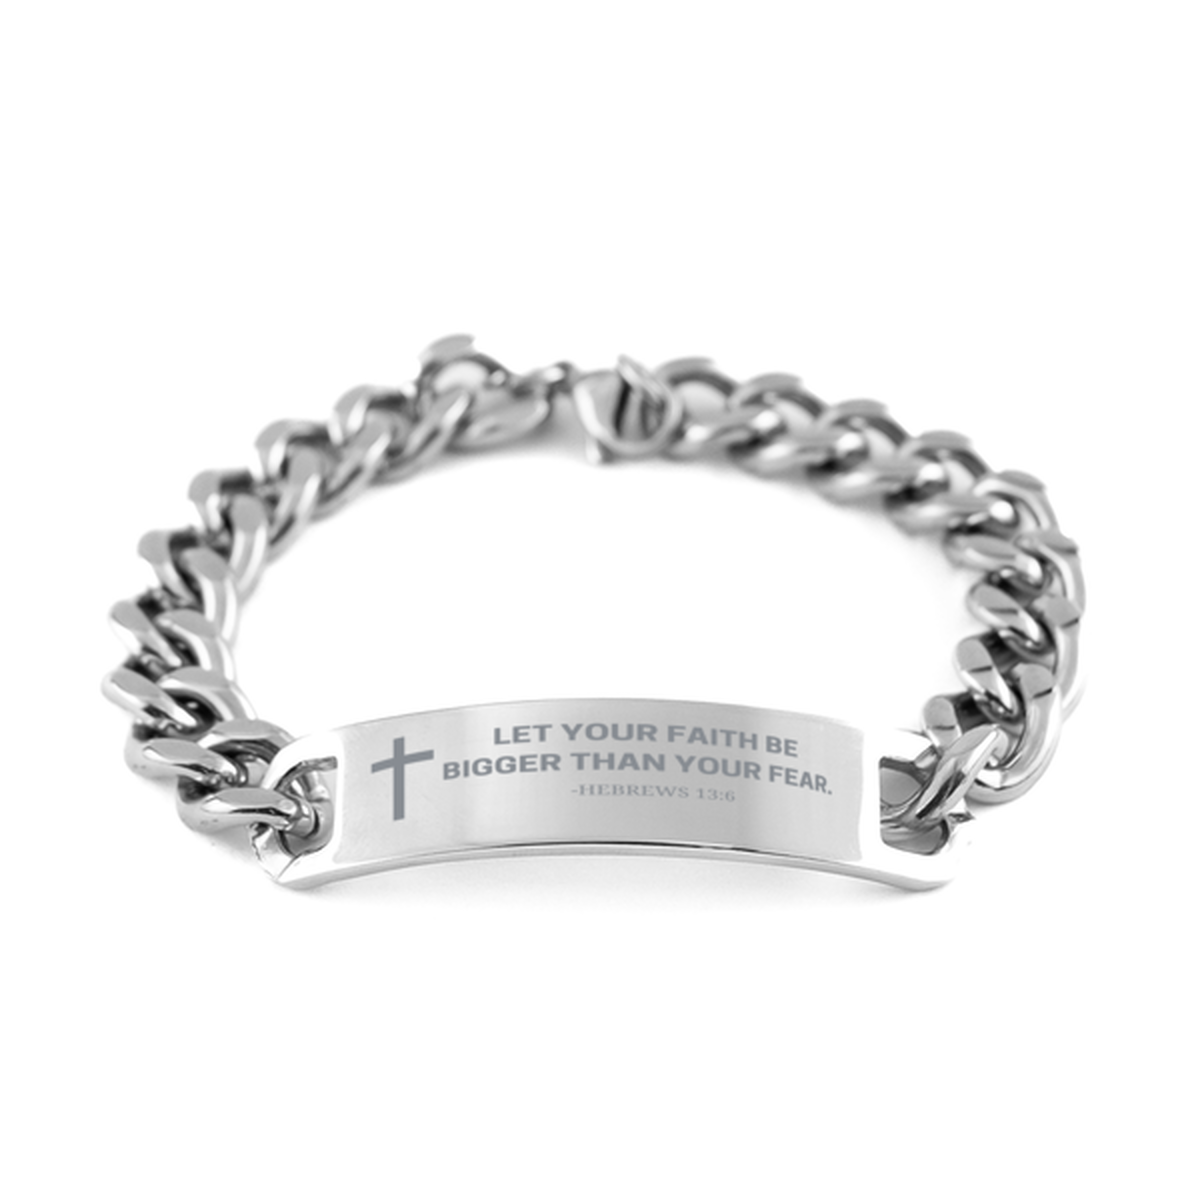 Baptism Gifts For Teenage Boys Girls, Christian Bible Verse Cuban Chain Bracelet, Let your faith be bigger than your fear, Catholic Confirmation Gifts for Son, Godson, Grandson, Nephew